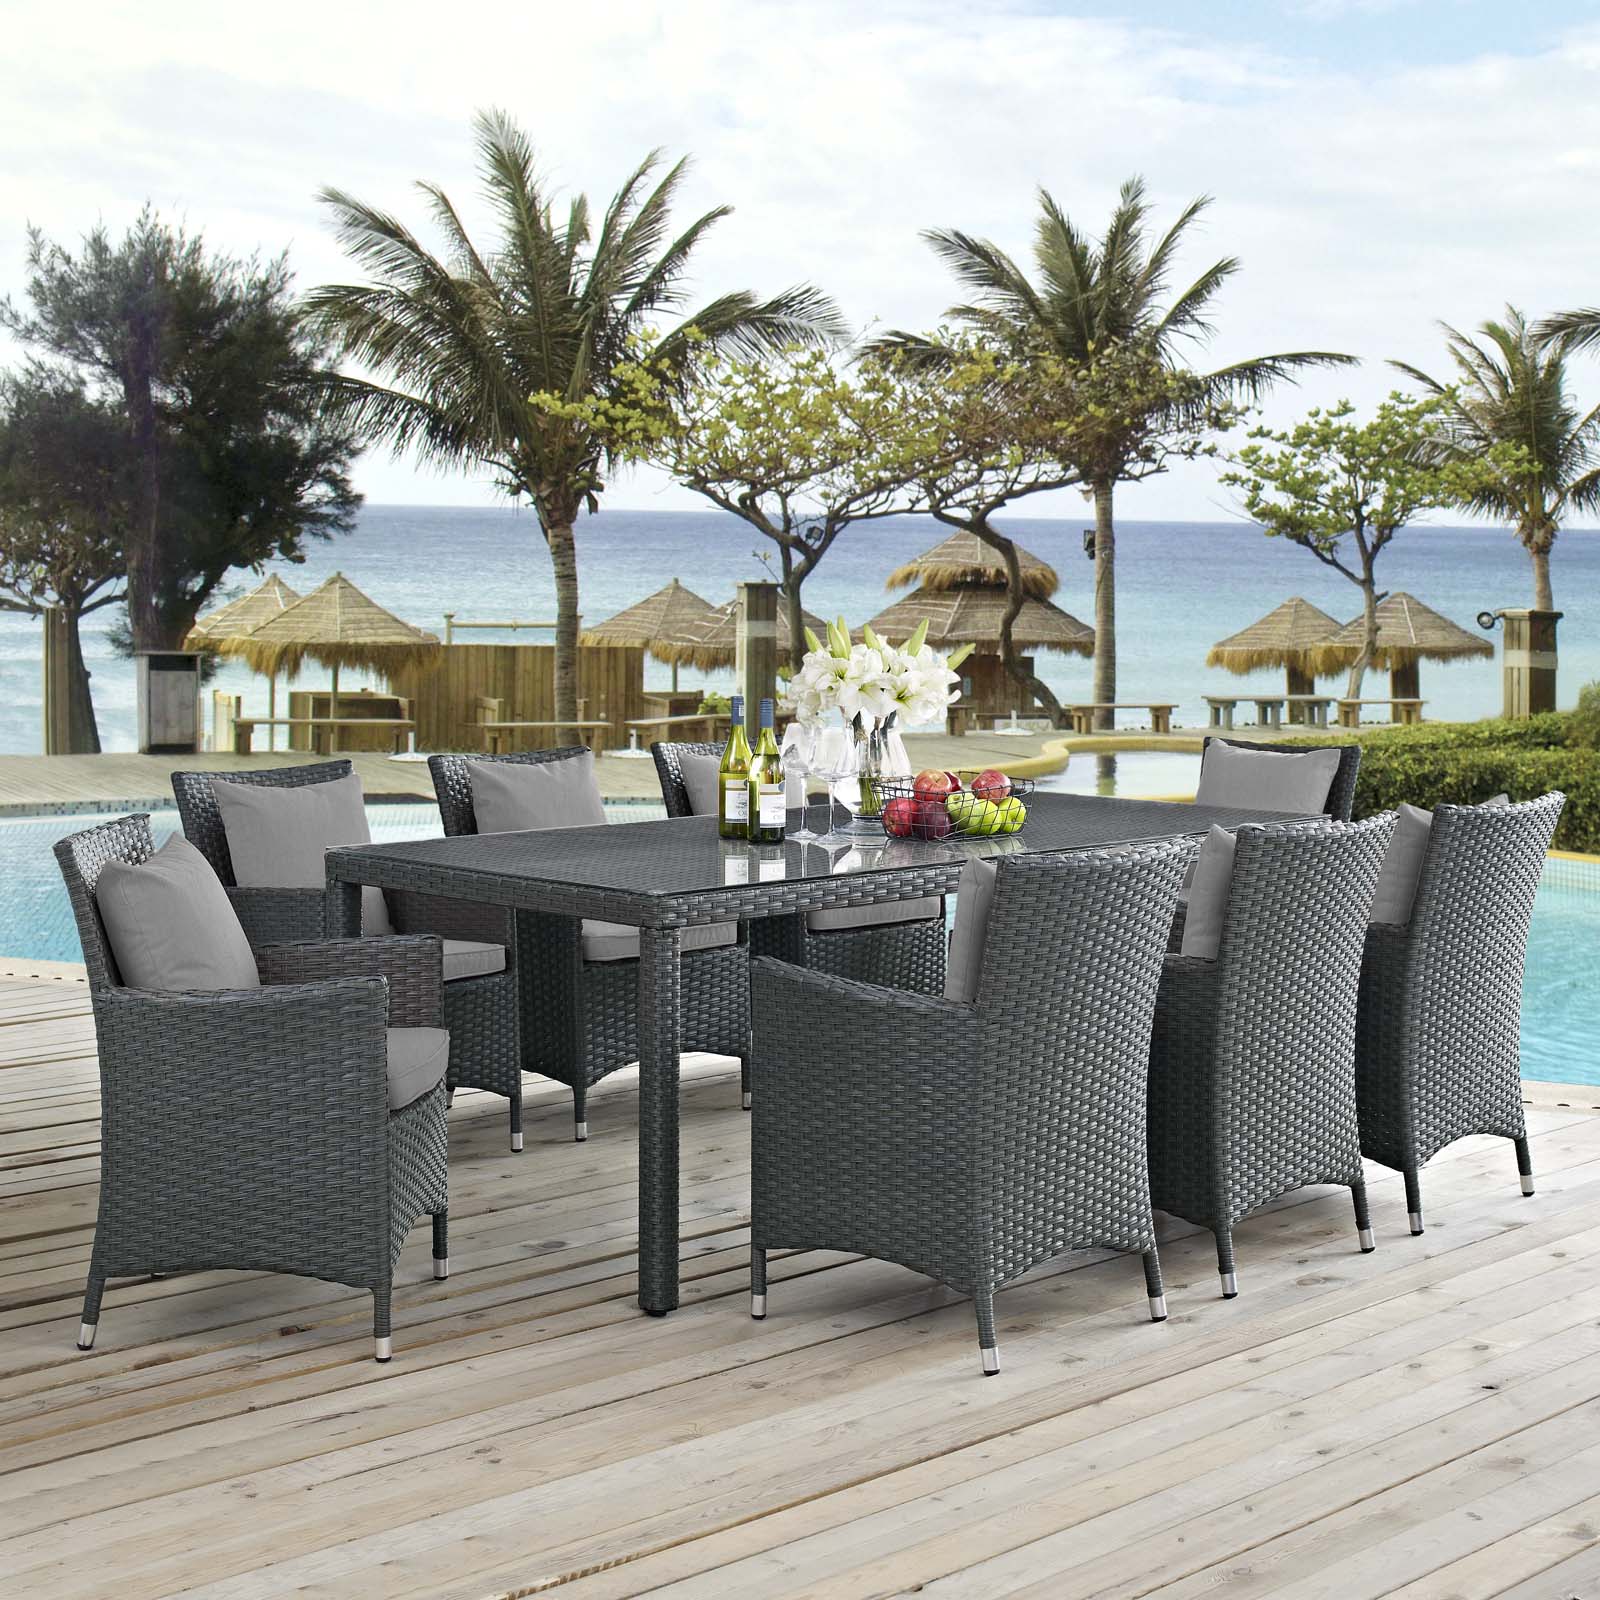 Modern Contemporary Urban Outdoor Patio Balcony Garden Furniture Side Dining Chair and Table Set, Sunbrella Rattan Wicker, Grey Gray - image 2 of 6